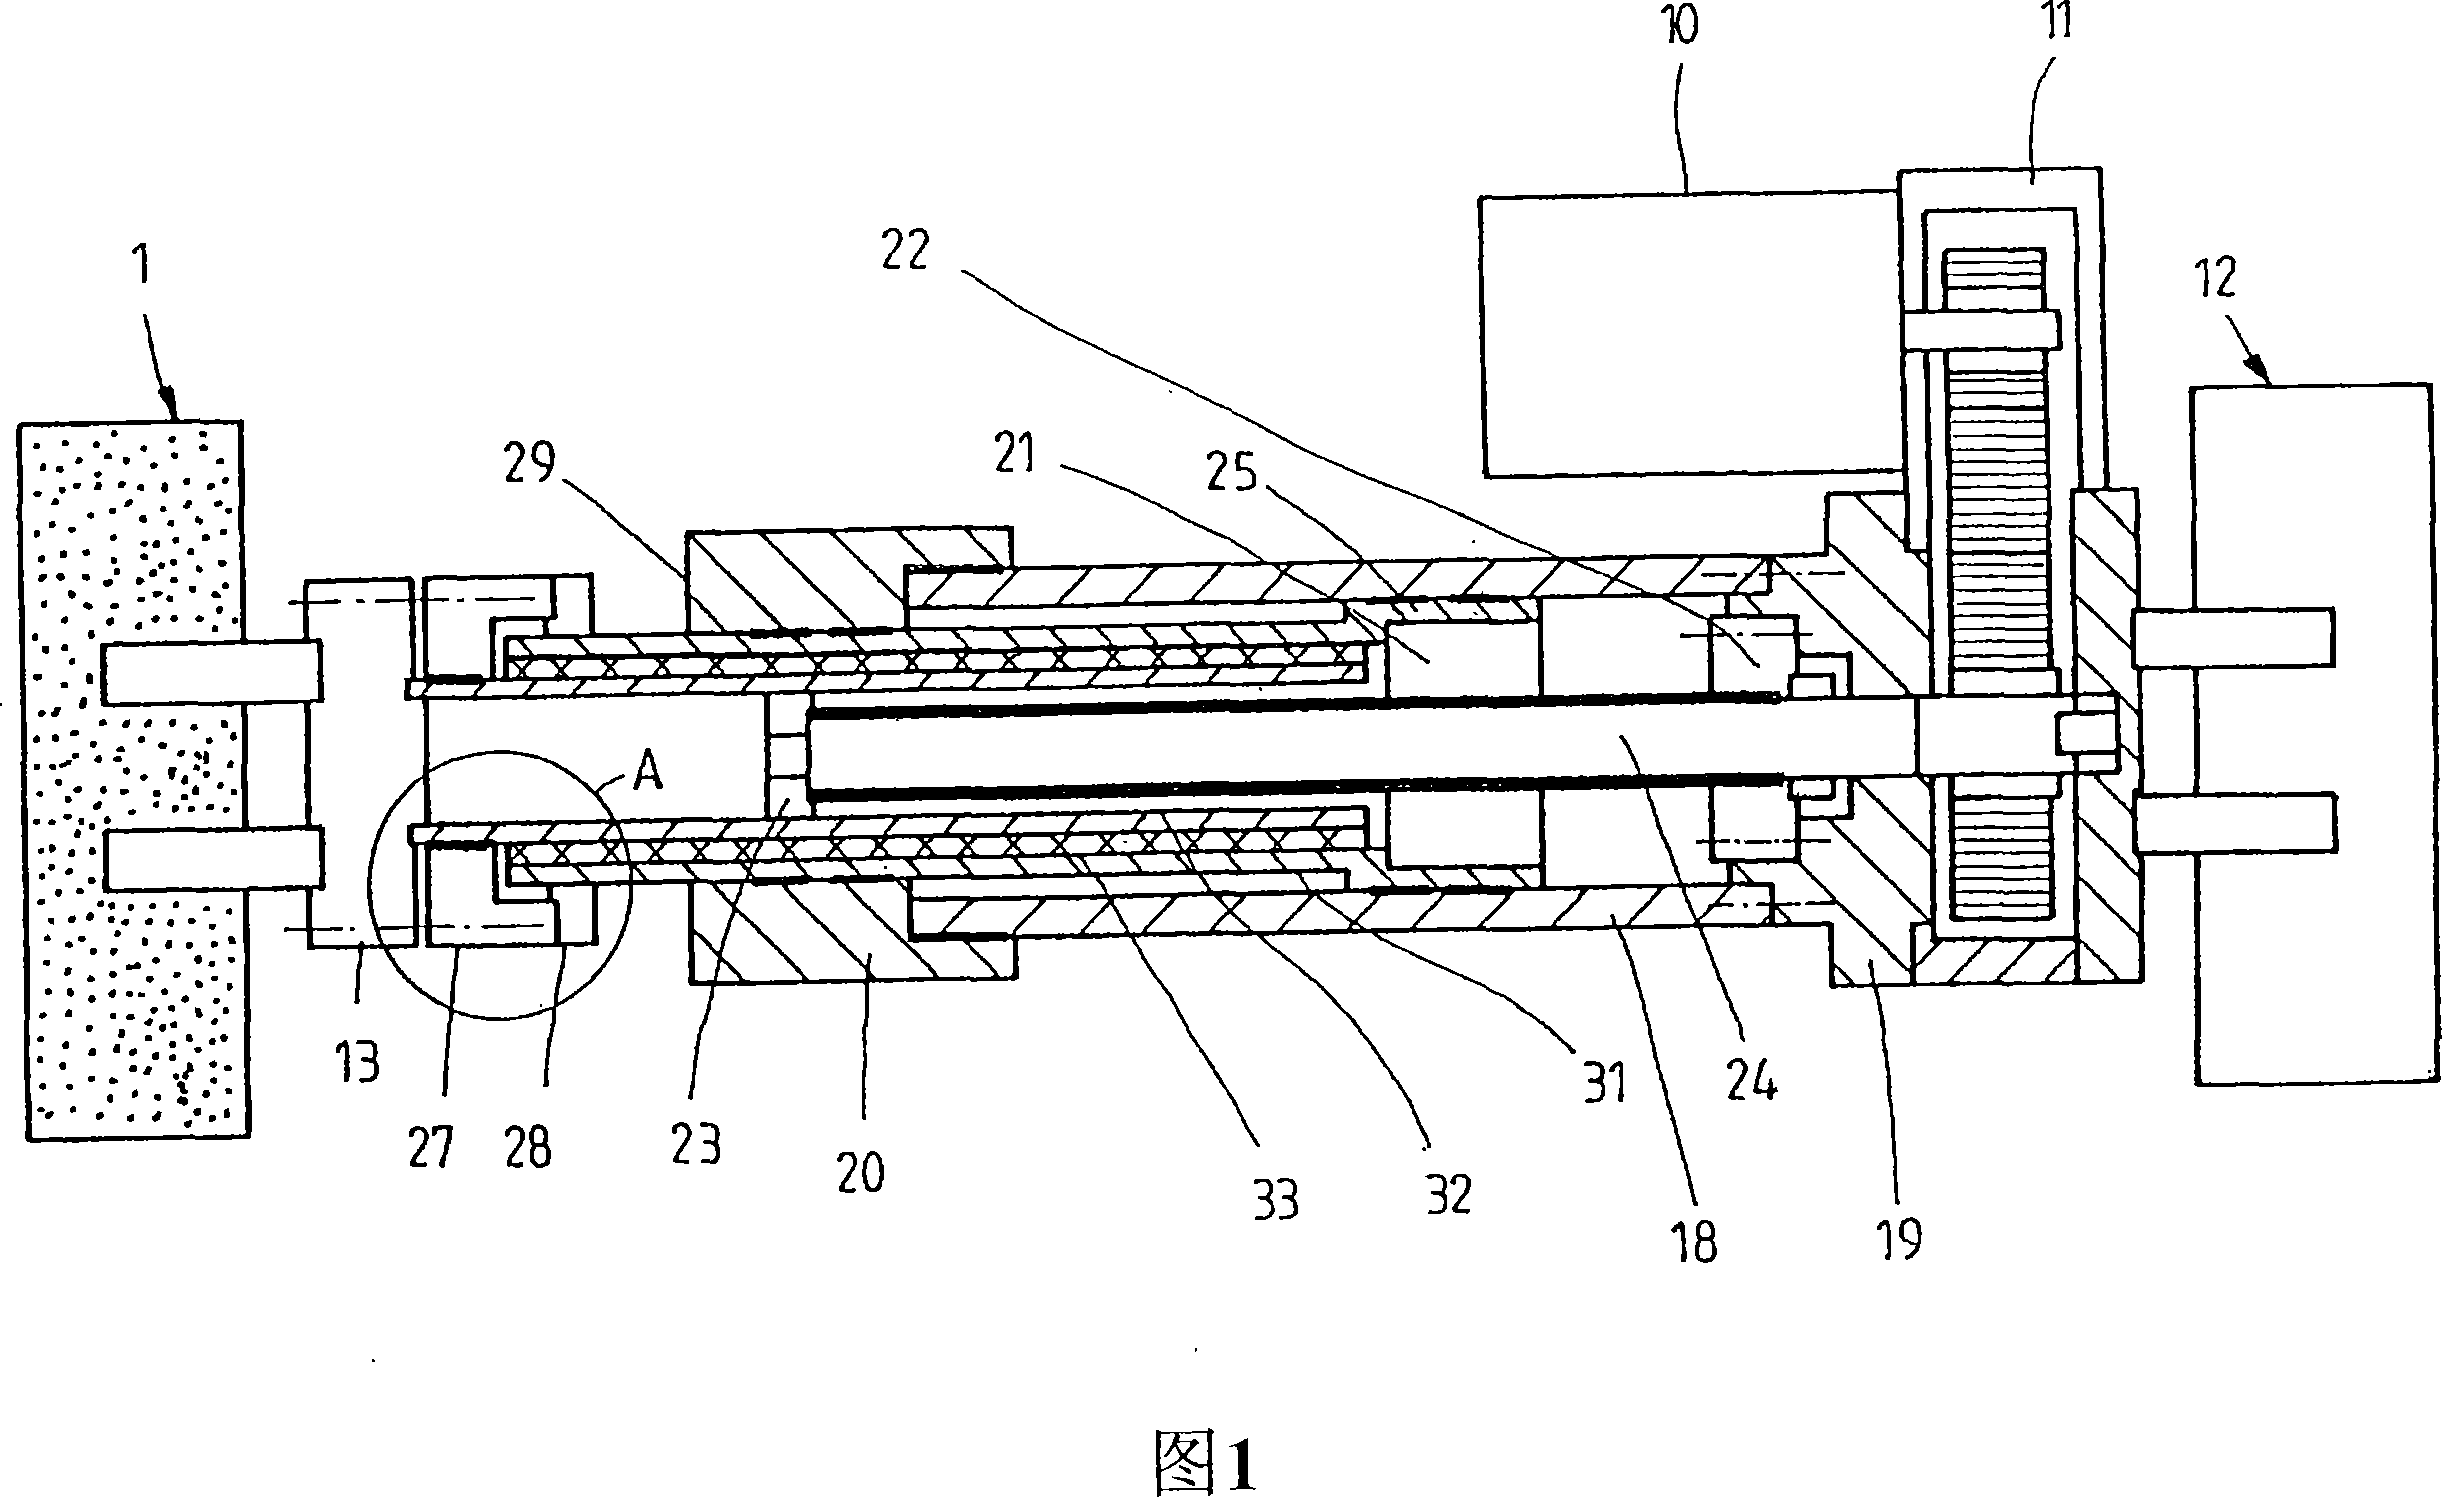 Electrically driven linear actuator